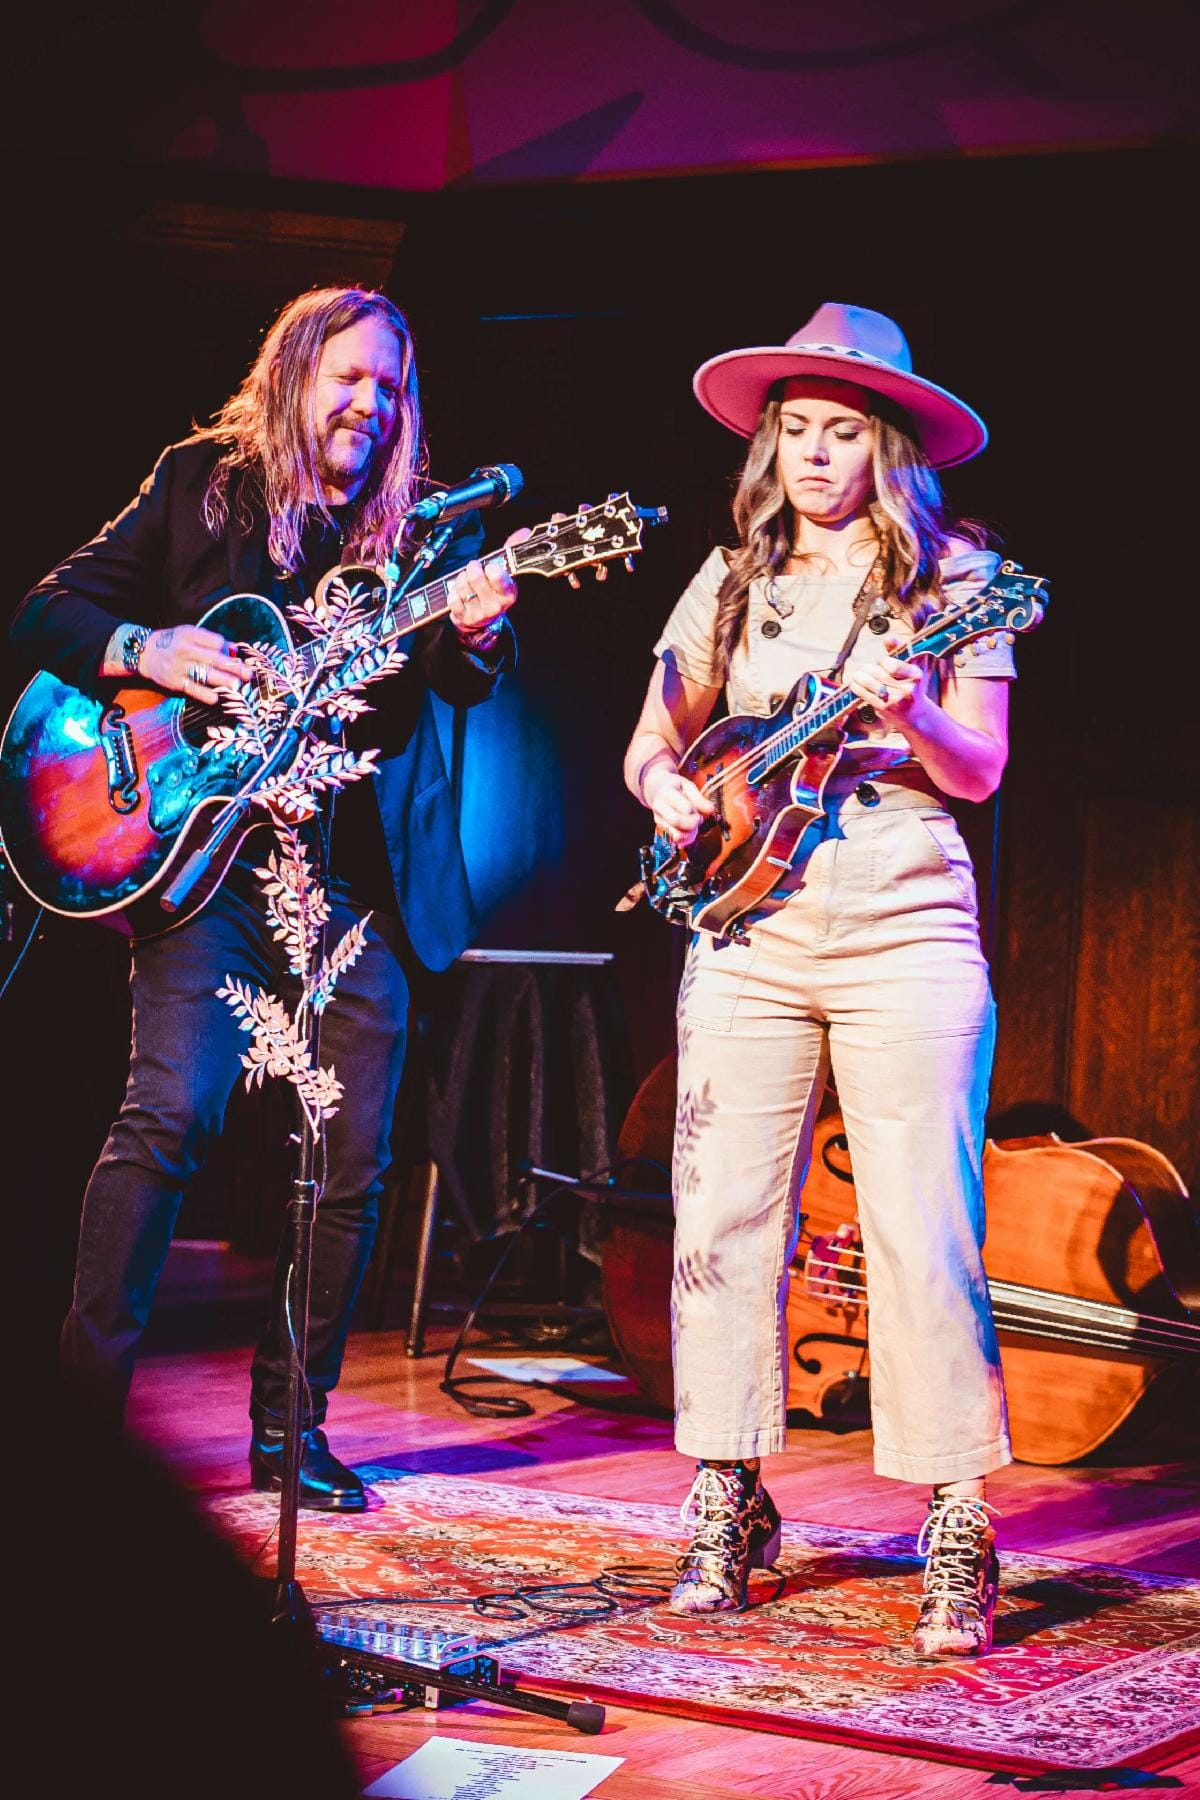 Watch: Devon Allman Joins Sierra Hull on The Allman Brothers Band Classic “End of the Line” in St. Louis